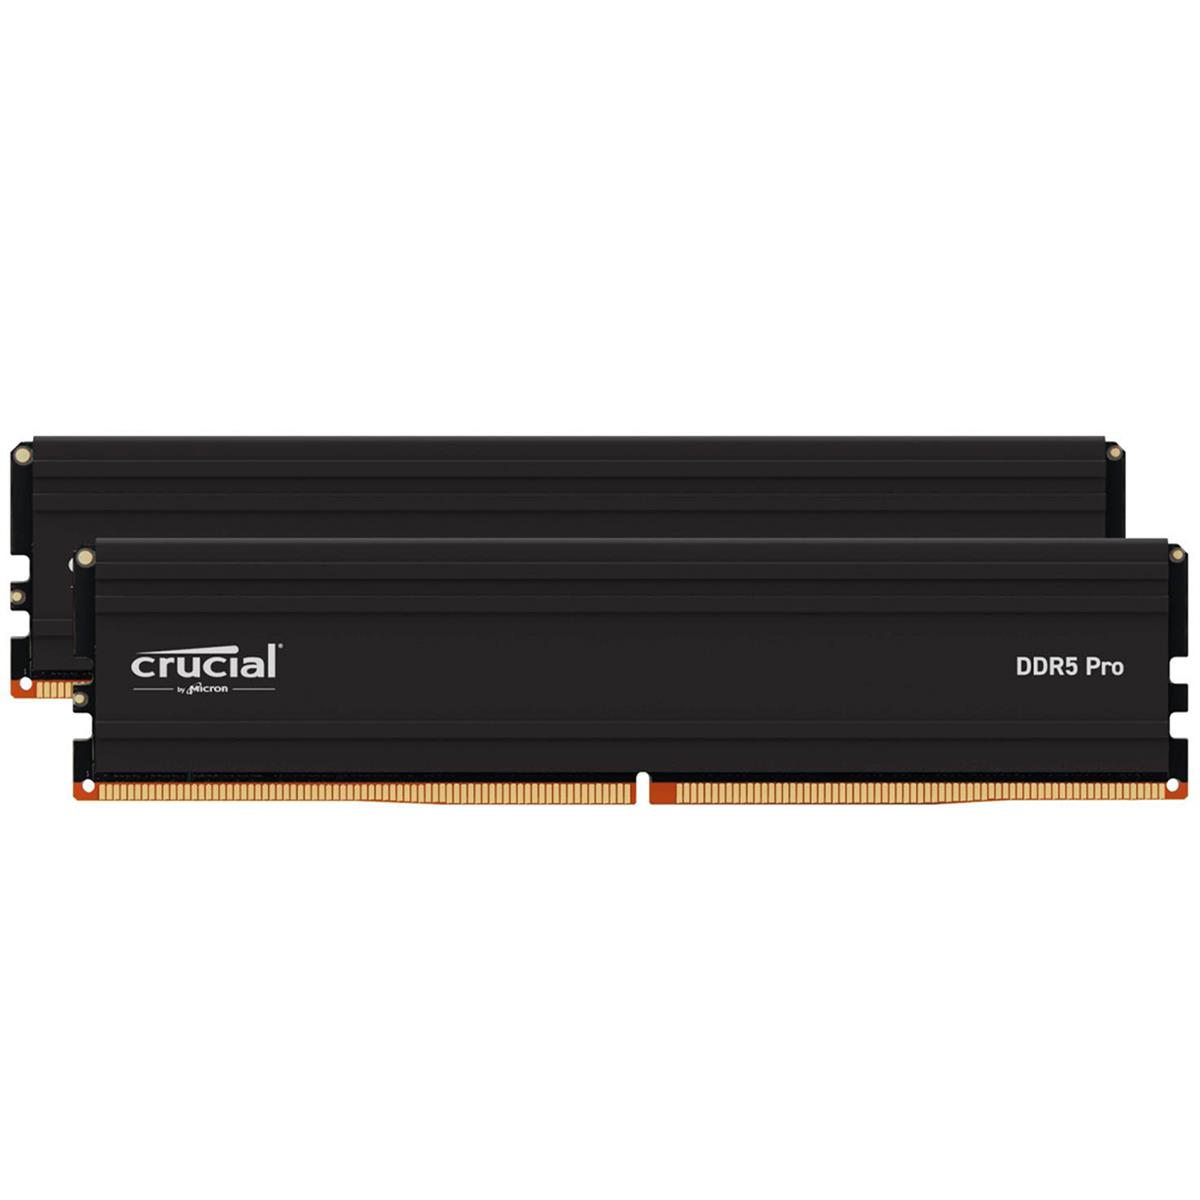 Image of Crucial Pro DDR5 5600MHz CL46 UDIMM Desktop Memory Module 96GB (2x48GB)